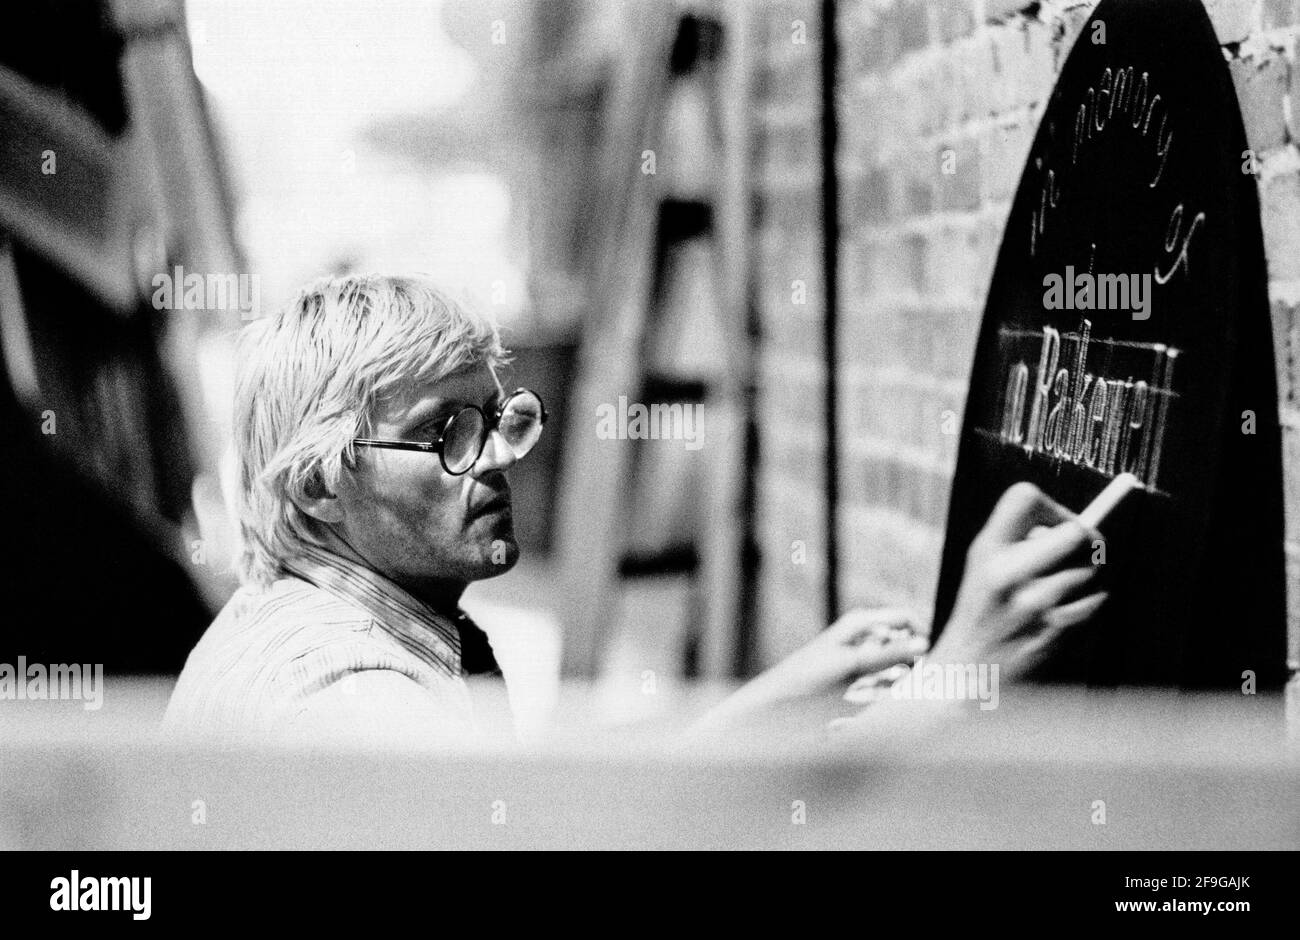 David Hockney working on his stage designs for Stravinsky’s opera THE RAKE'S PROGRESS at Glyndebourne Festival Opera, East Sussex, England  1975 Stock Photo